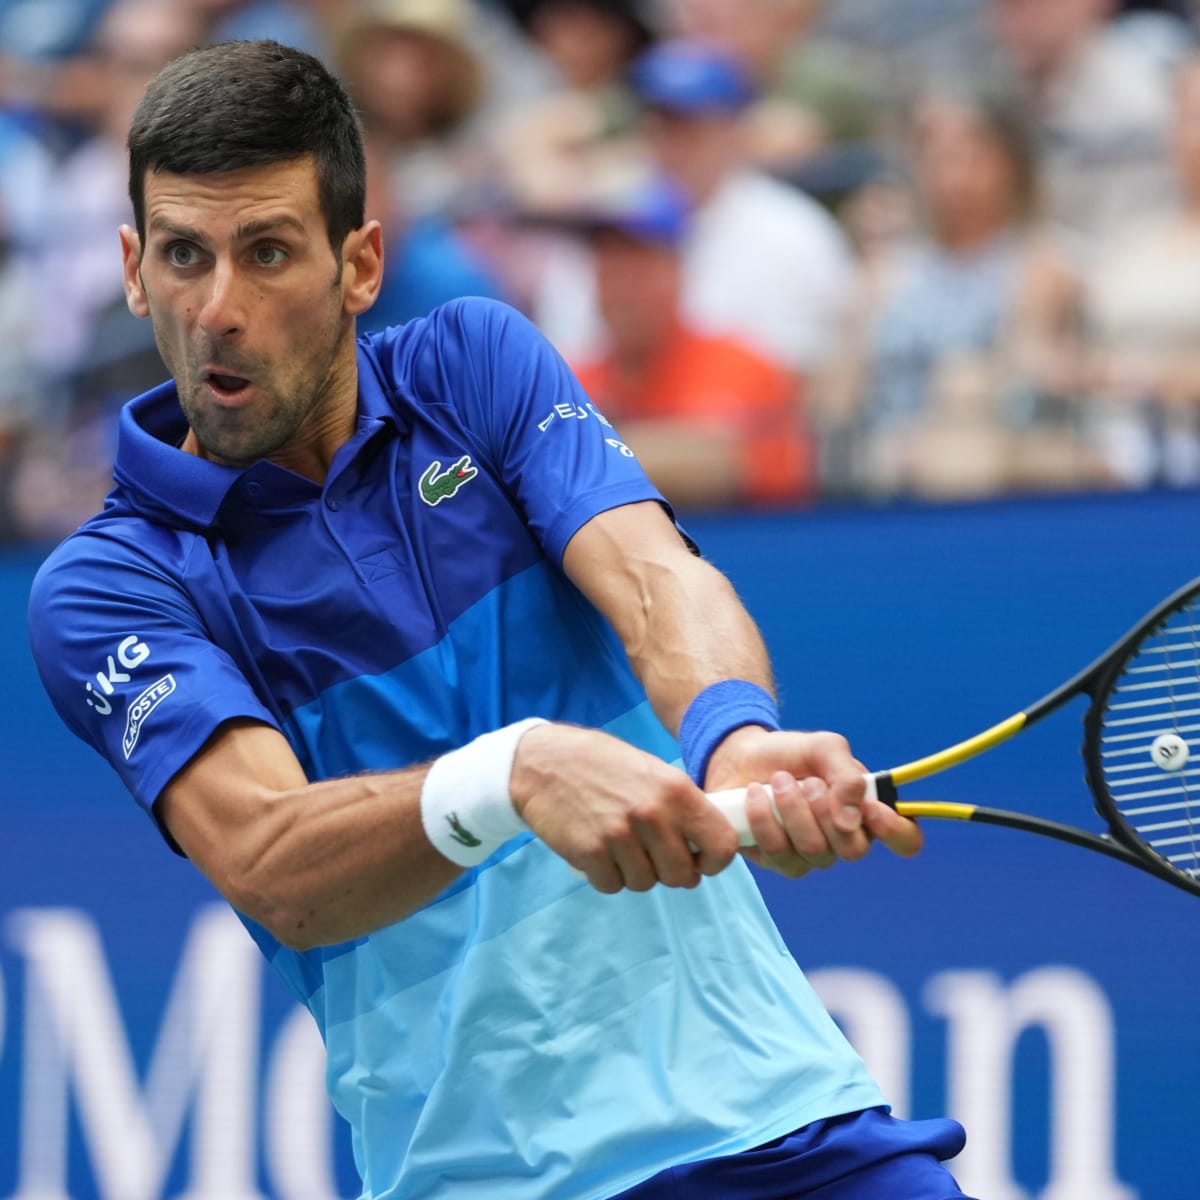 Djokovic given medical exemption to play at Australian Open - Sports Illustrated